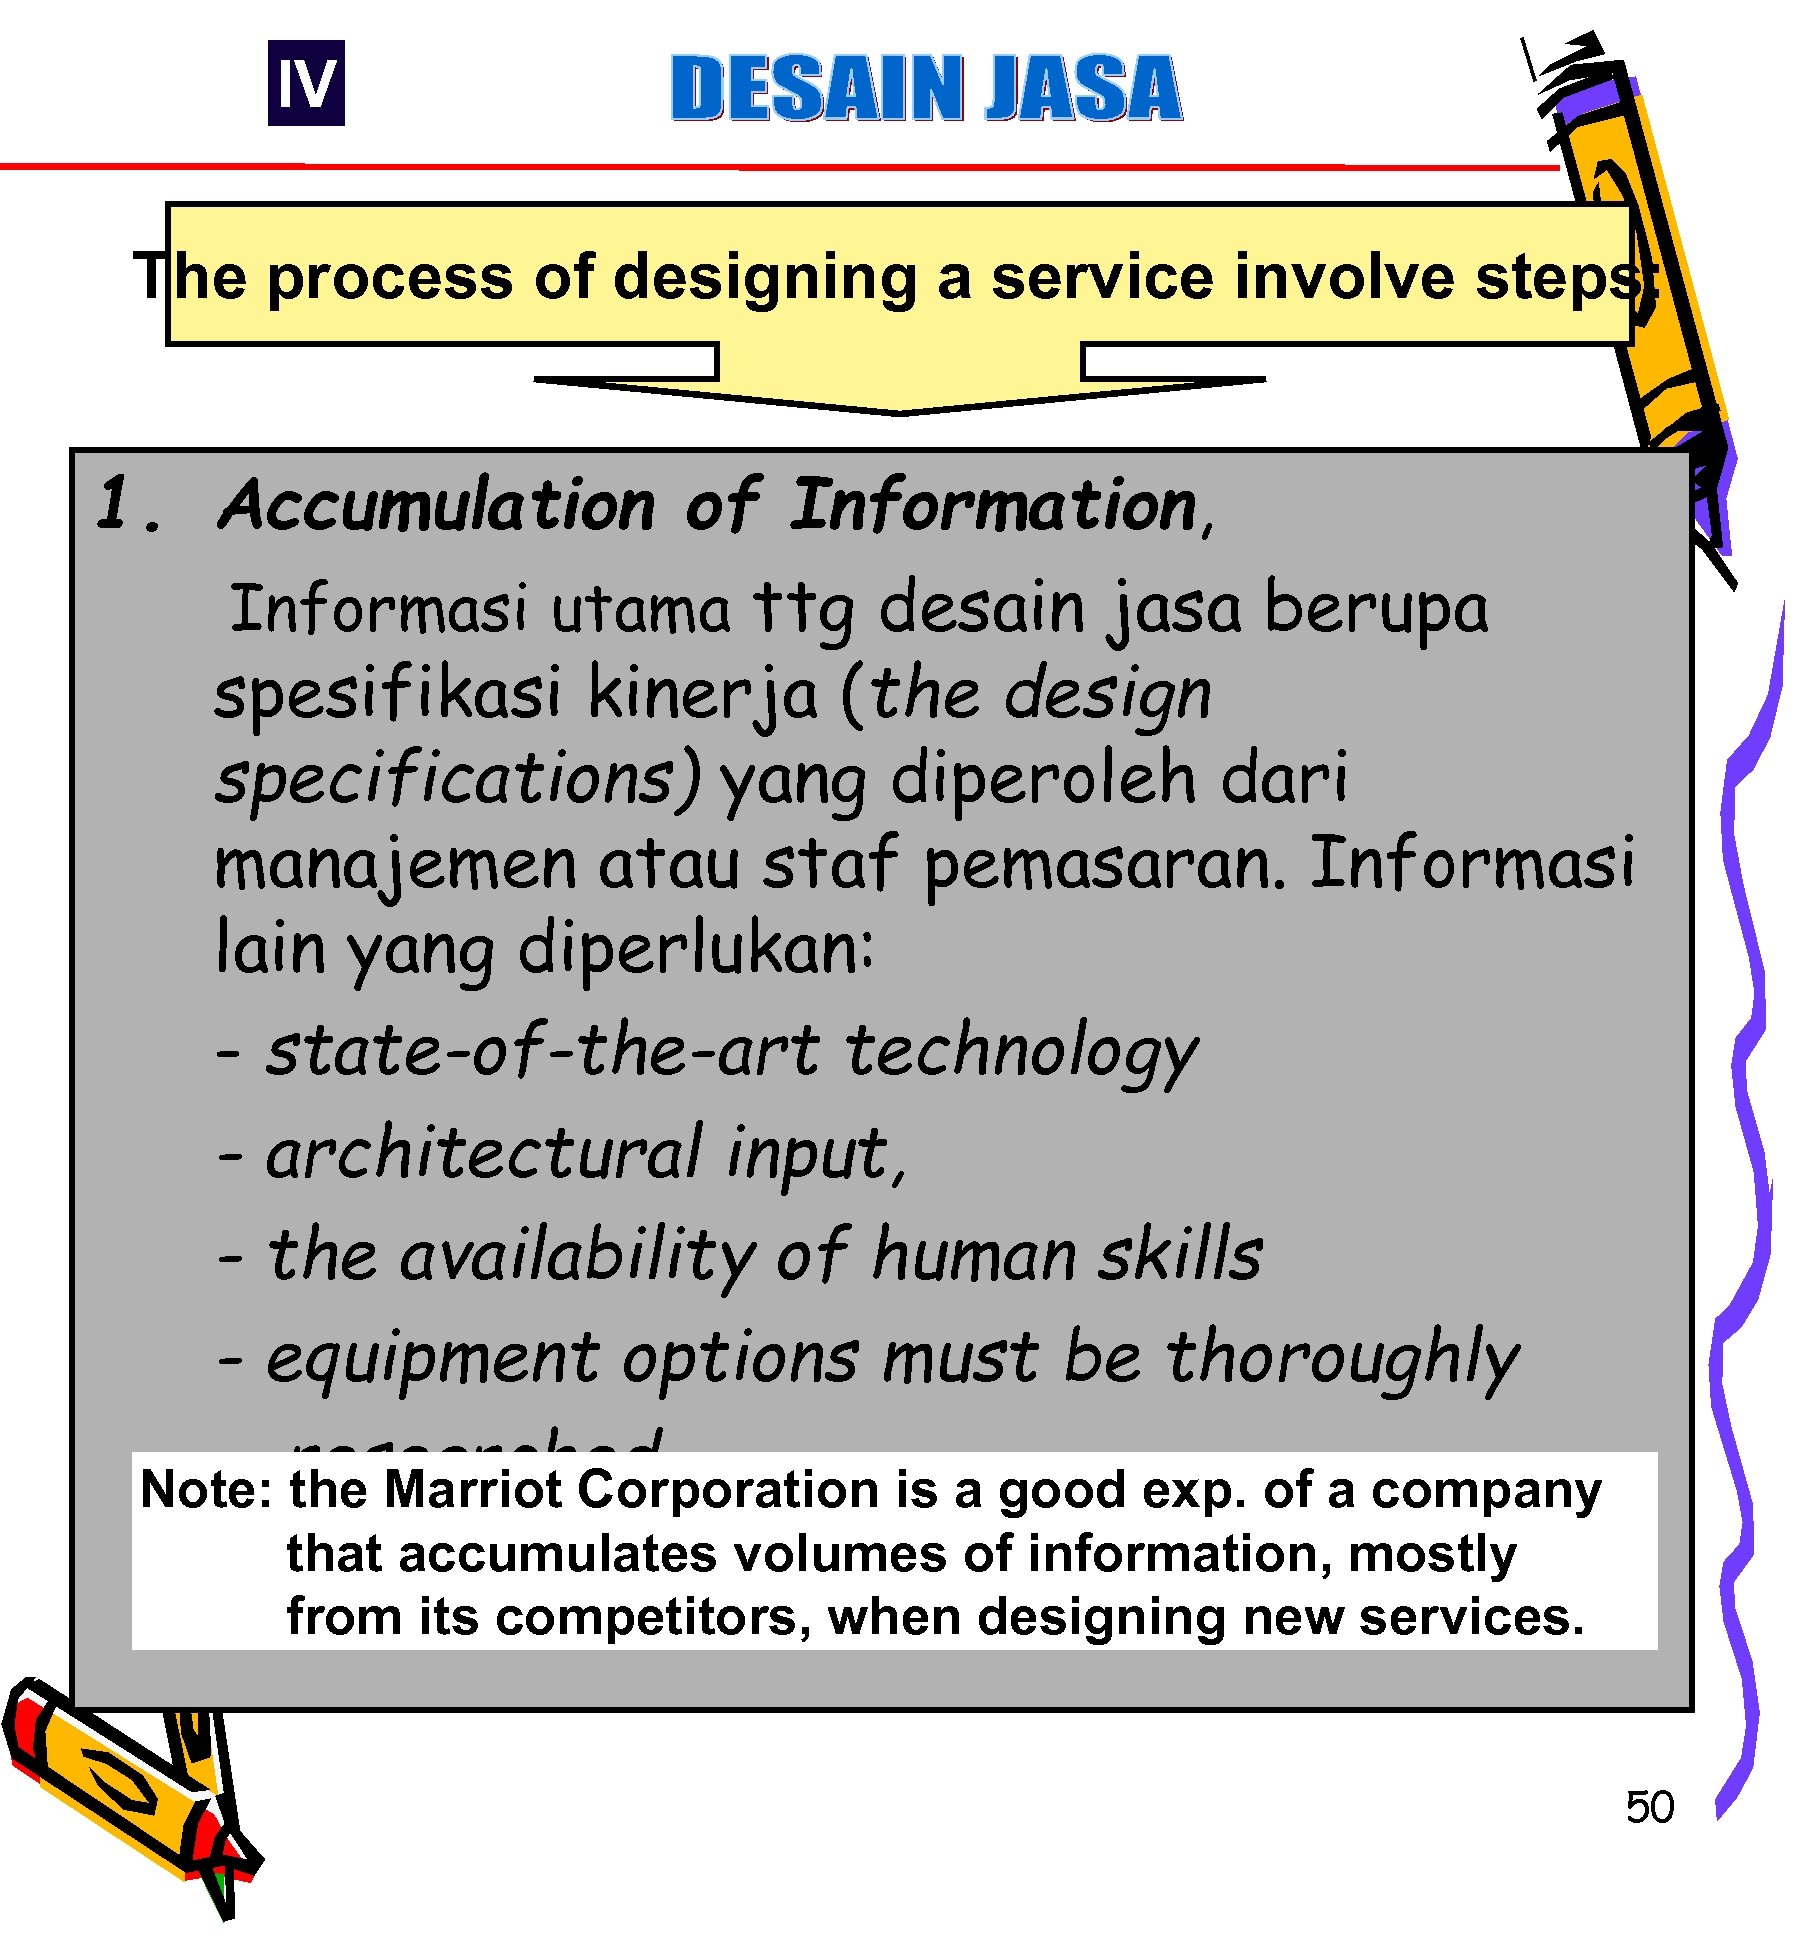 IV The process of designing a service involve steps: 1. Accumulation of Information, Informasi